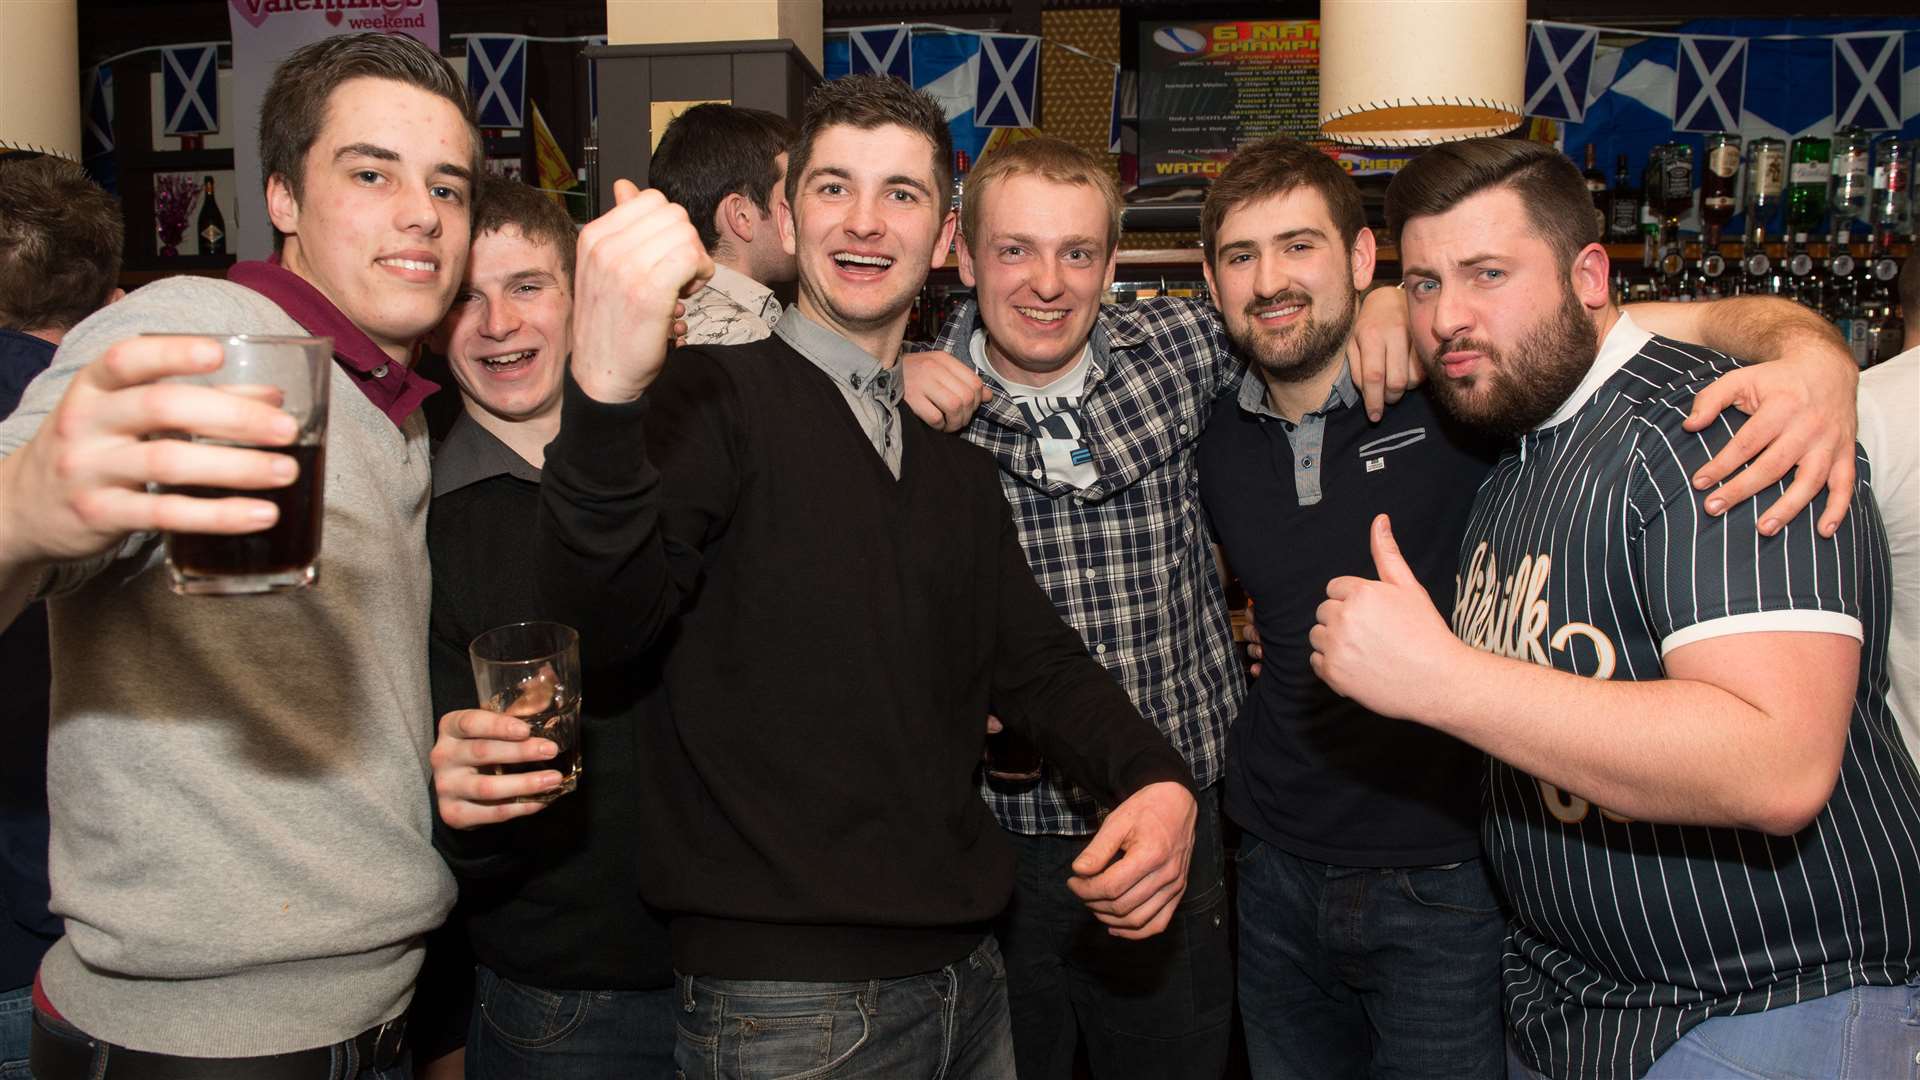 CitySeen 15MAR2014..Lads from Kingussie on a night out in Smith & Jones...Picture: Callum Mackay. Image No. 024769.